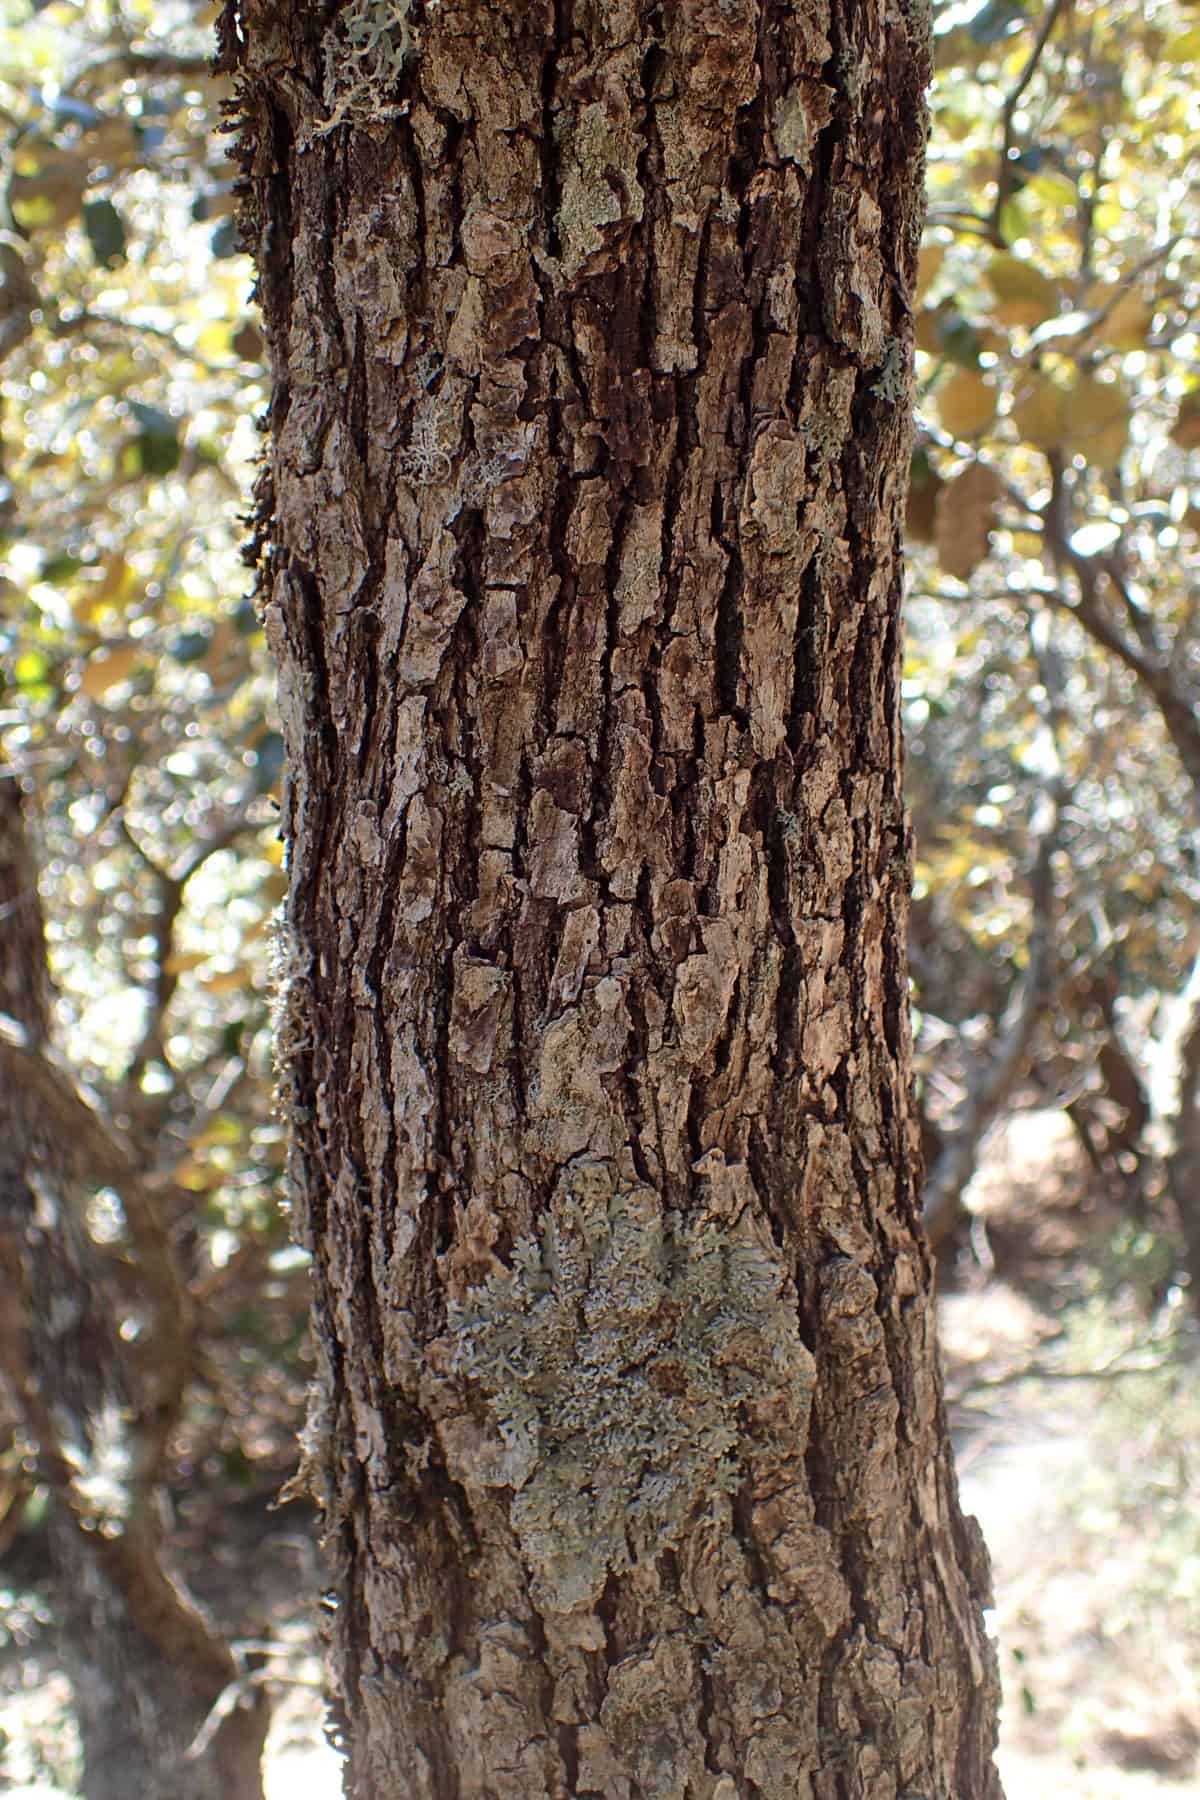 Close up of the trunk and bark of the golden oak tree